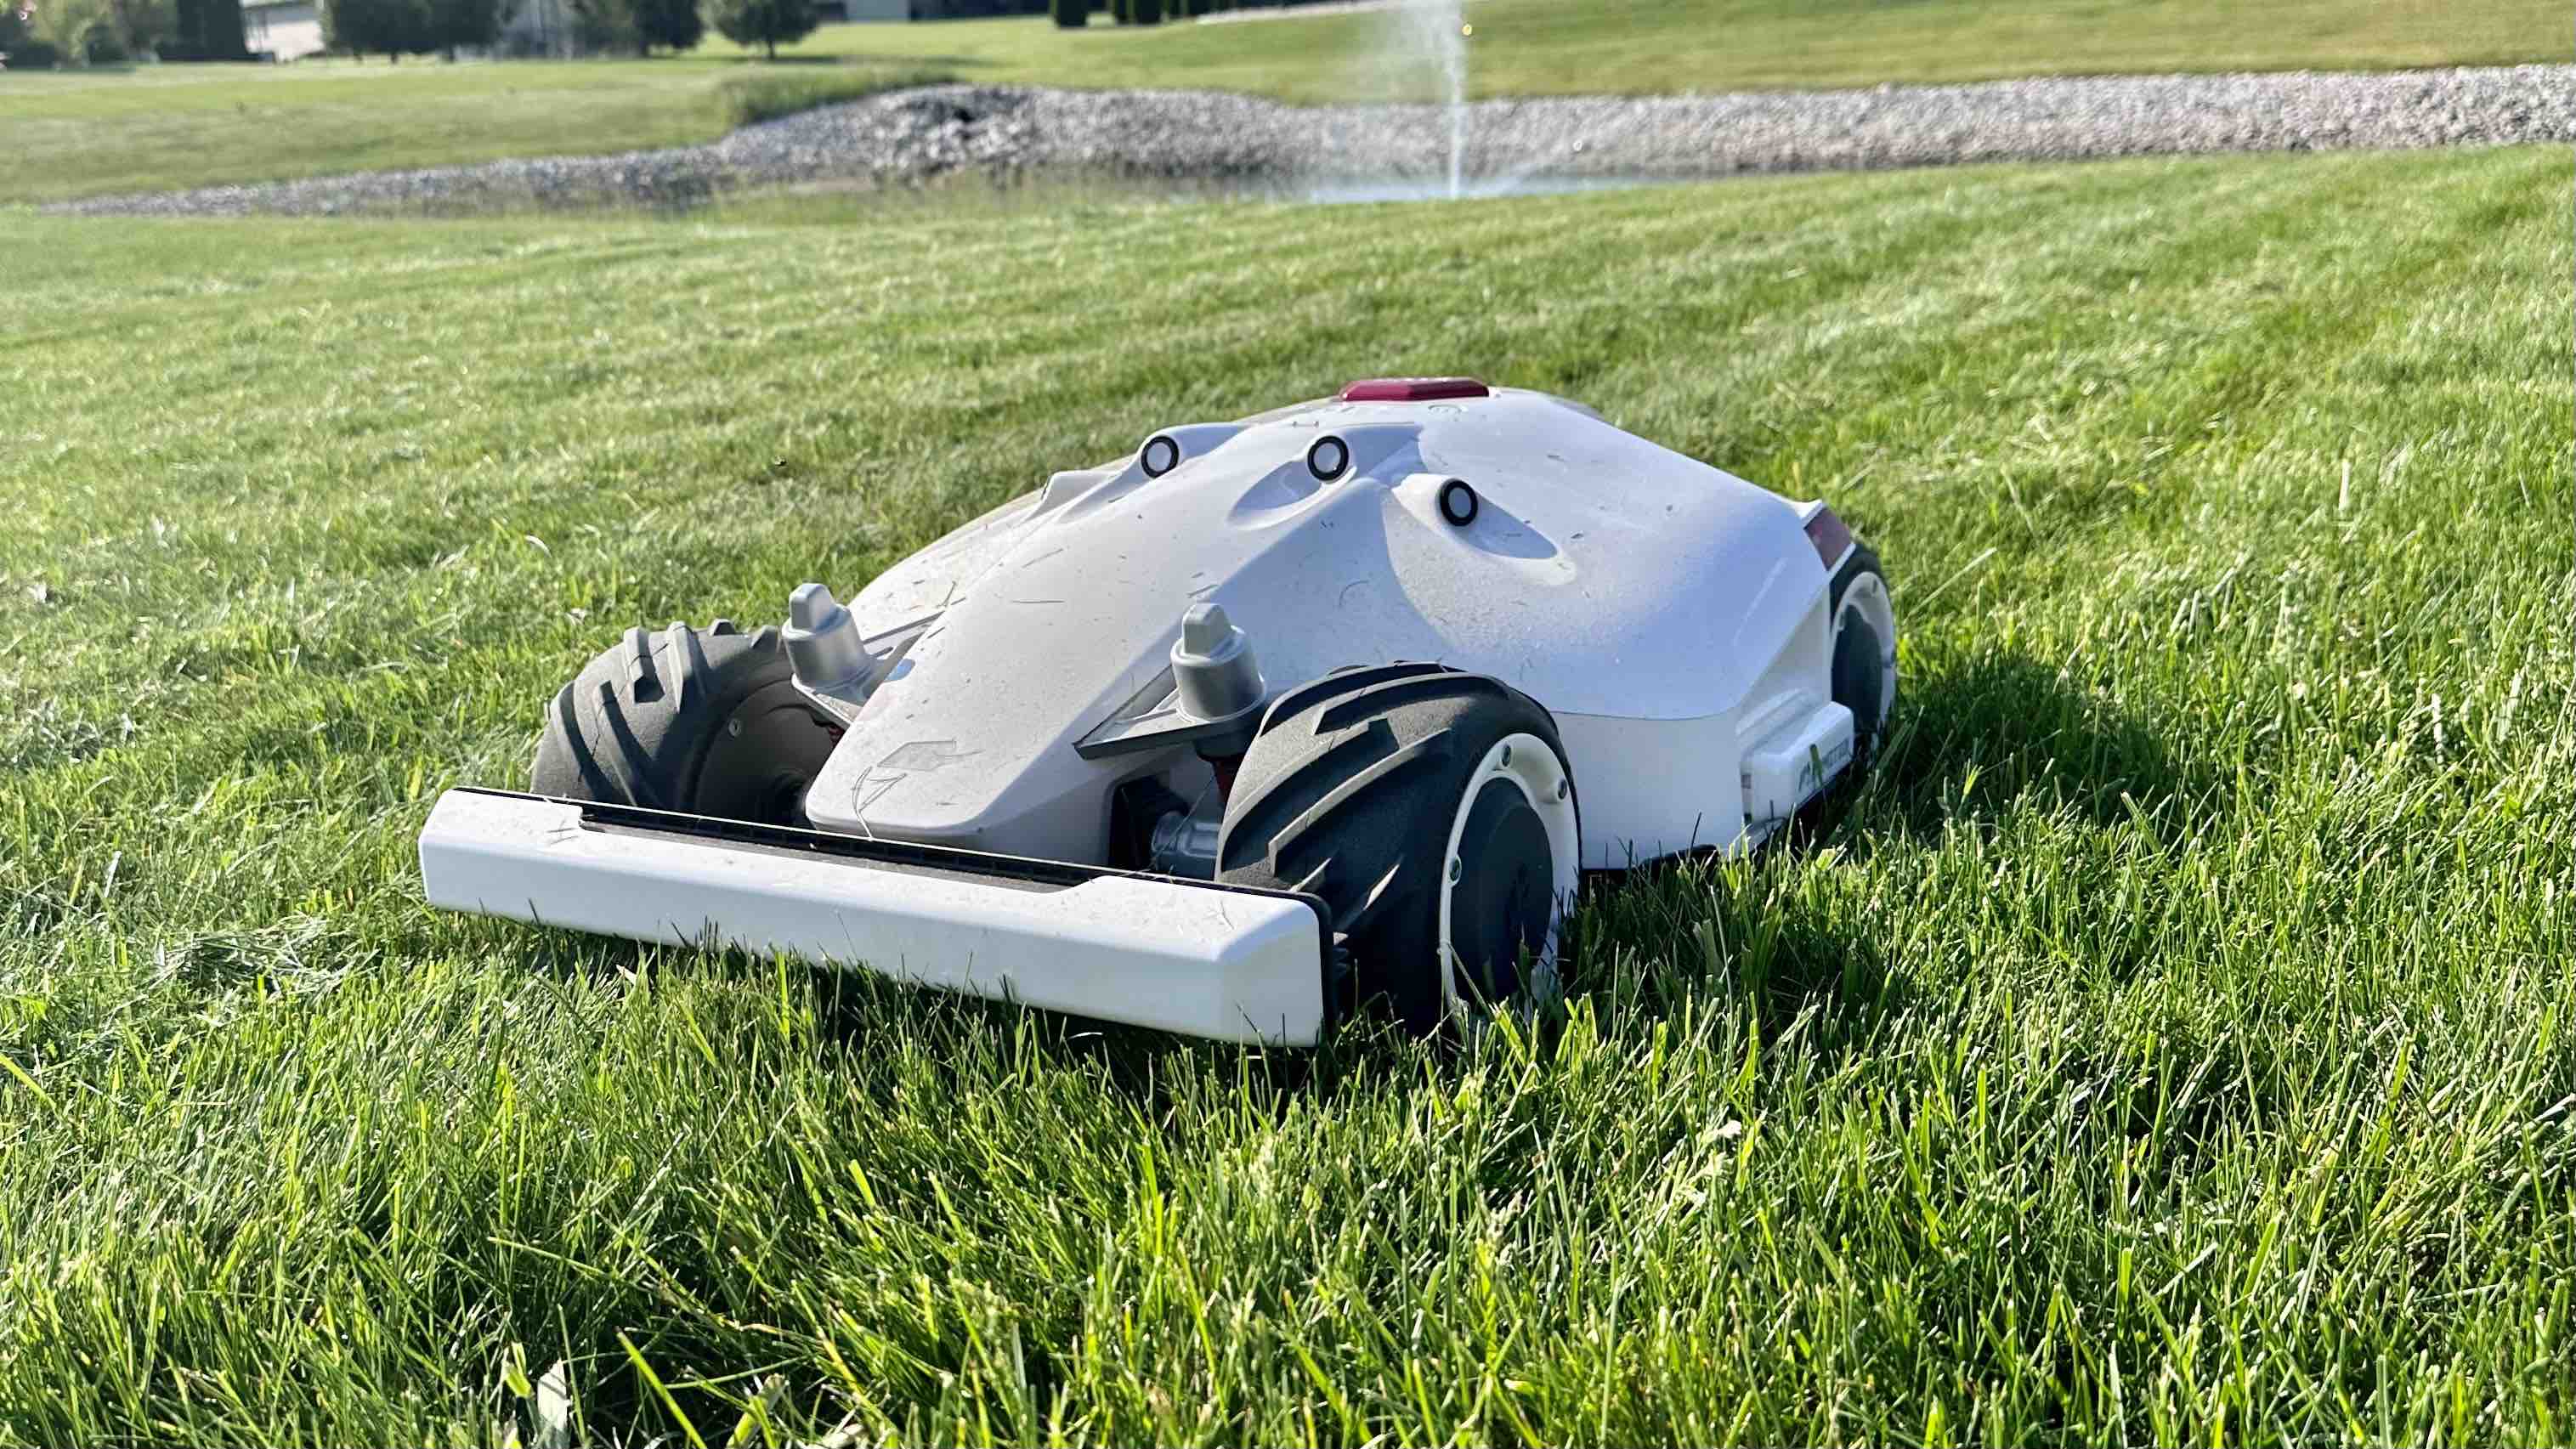 https://9to5mac.com/wp-content/uploads/sites/6/2023/06/iphone-powered-robot-mower-review-1.jpeg?quality=82&strip=all